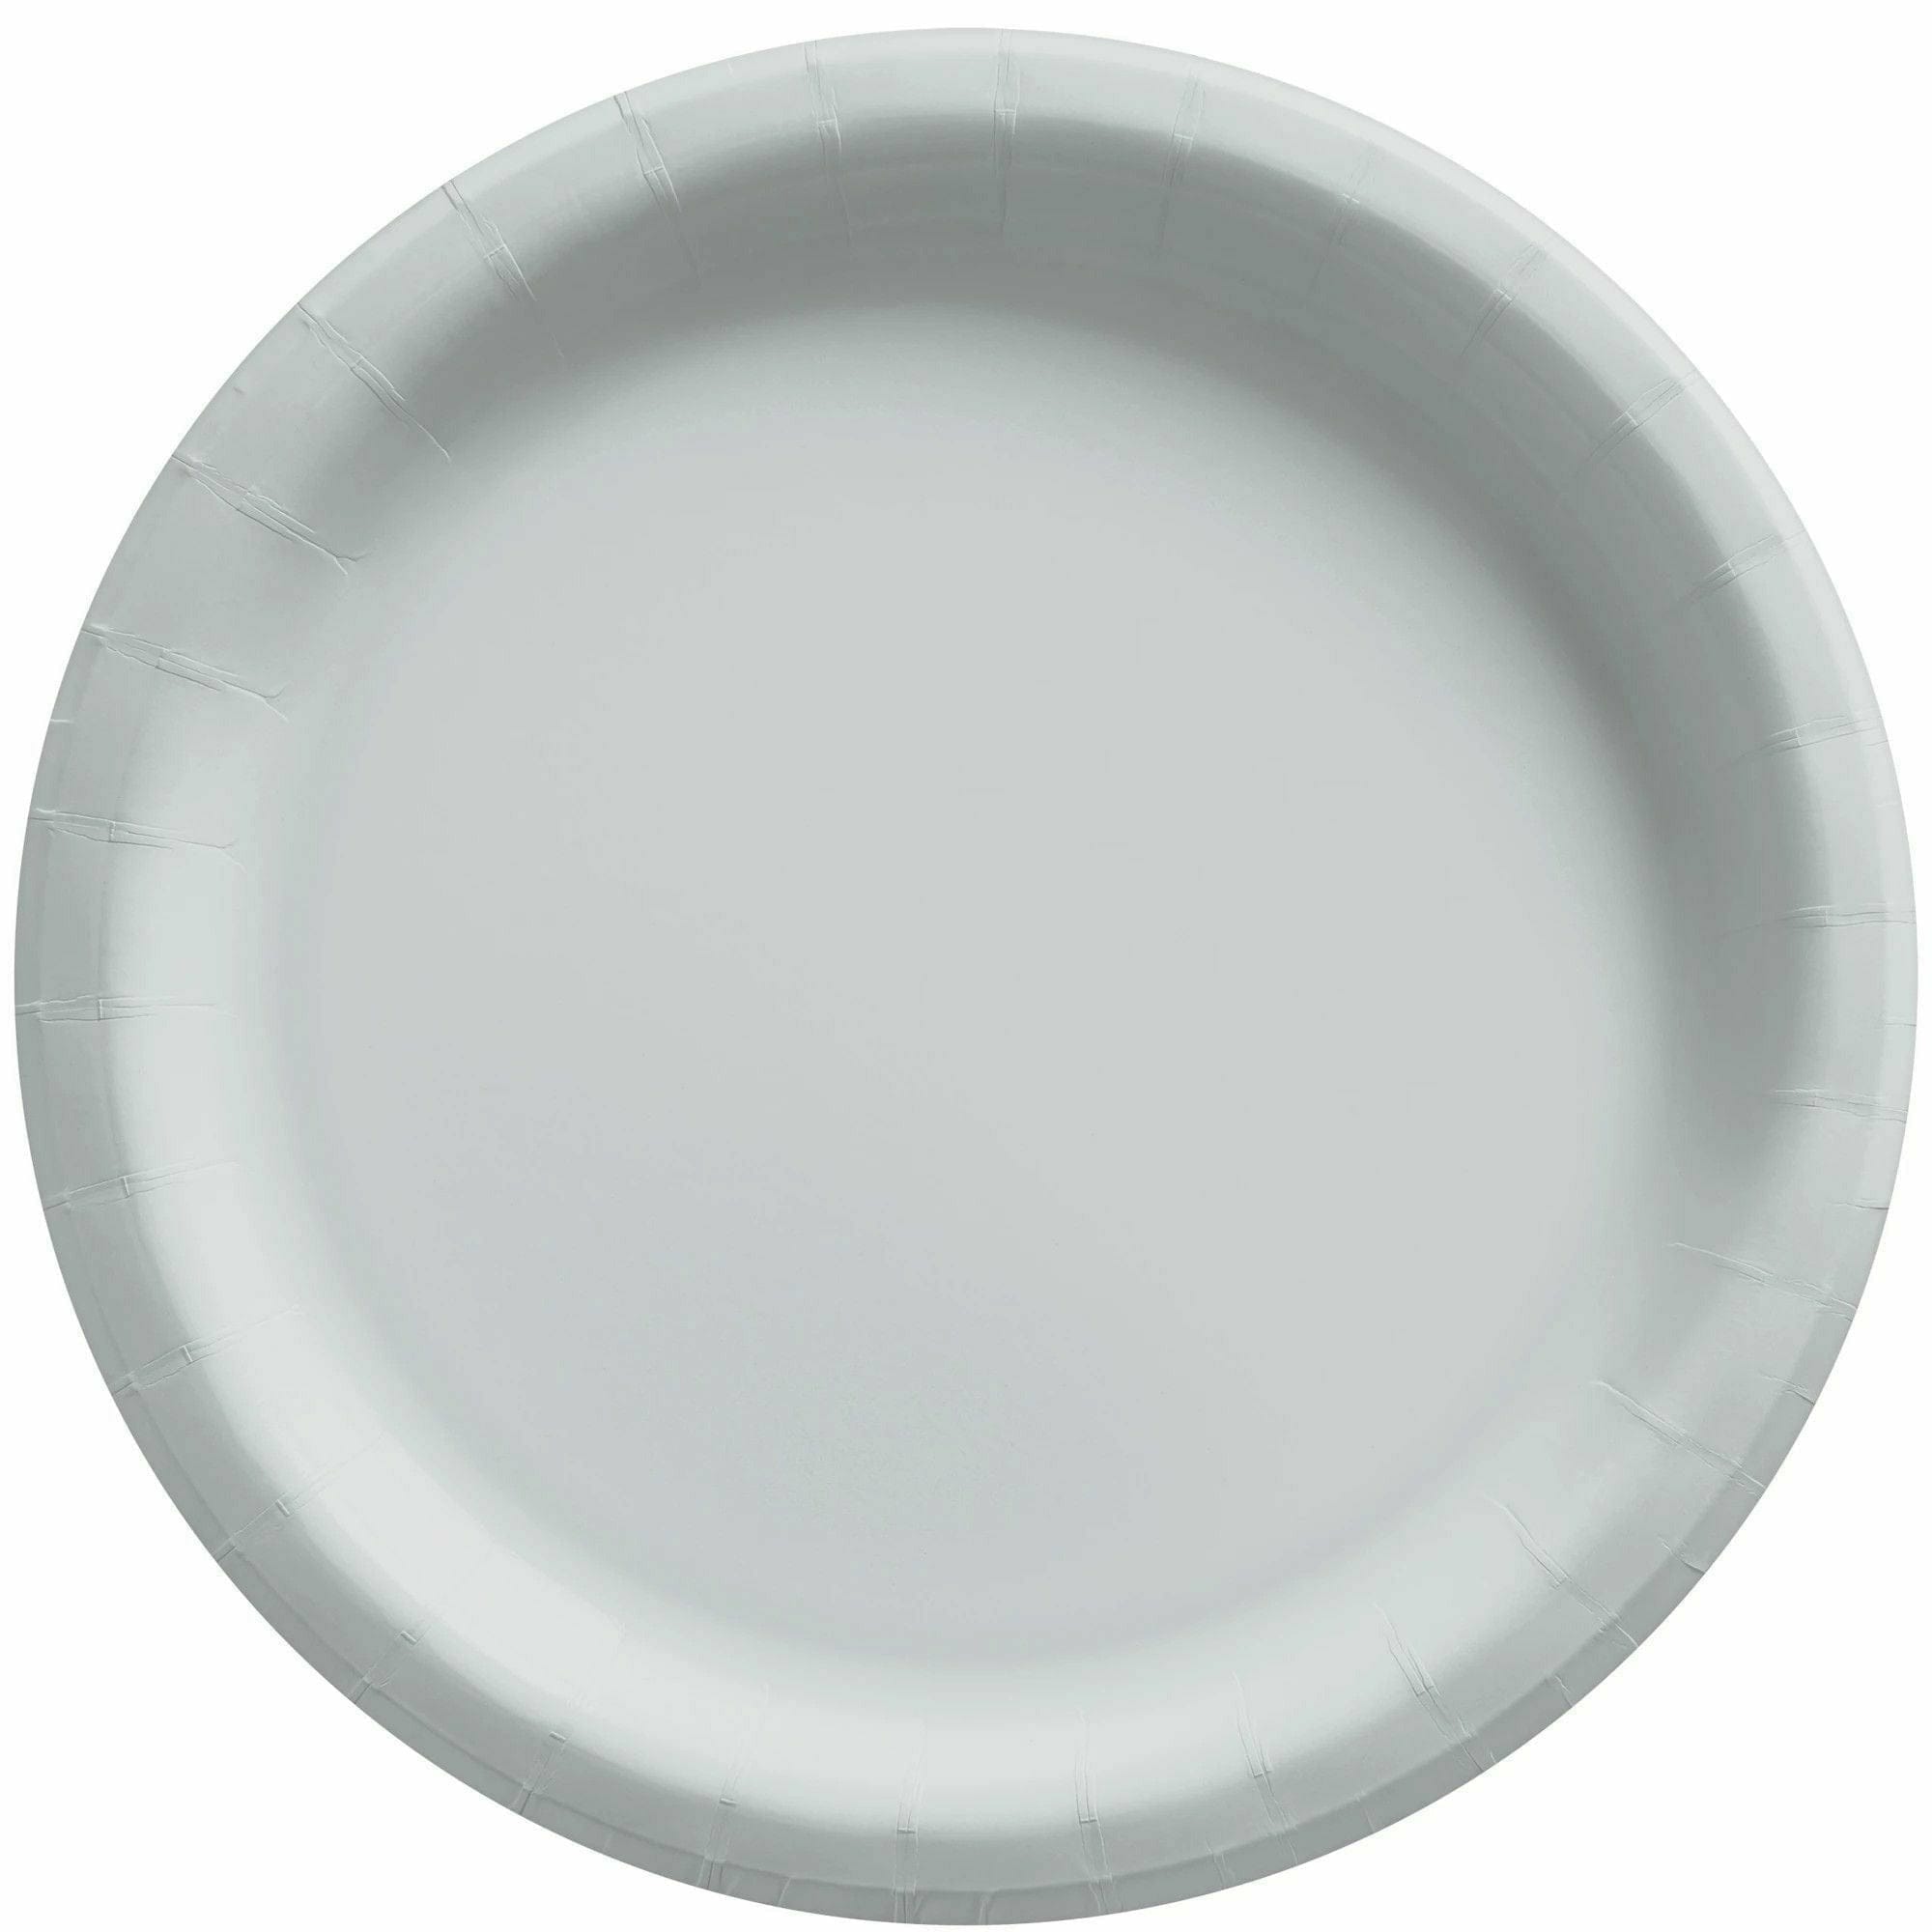 Amscan BASIC Silver - 6 3/4" Round Paper Plates, 50 Ct.